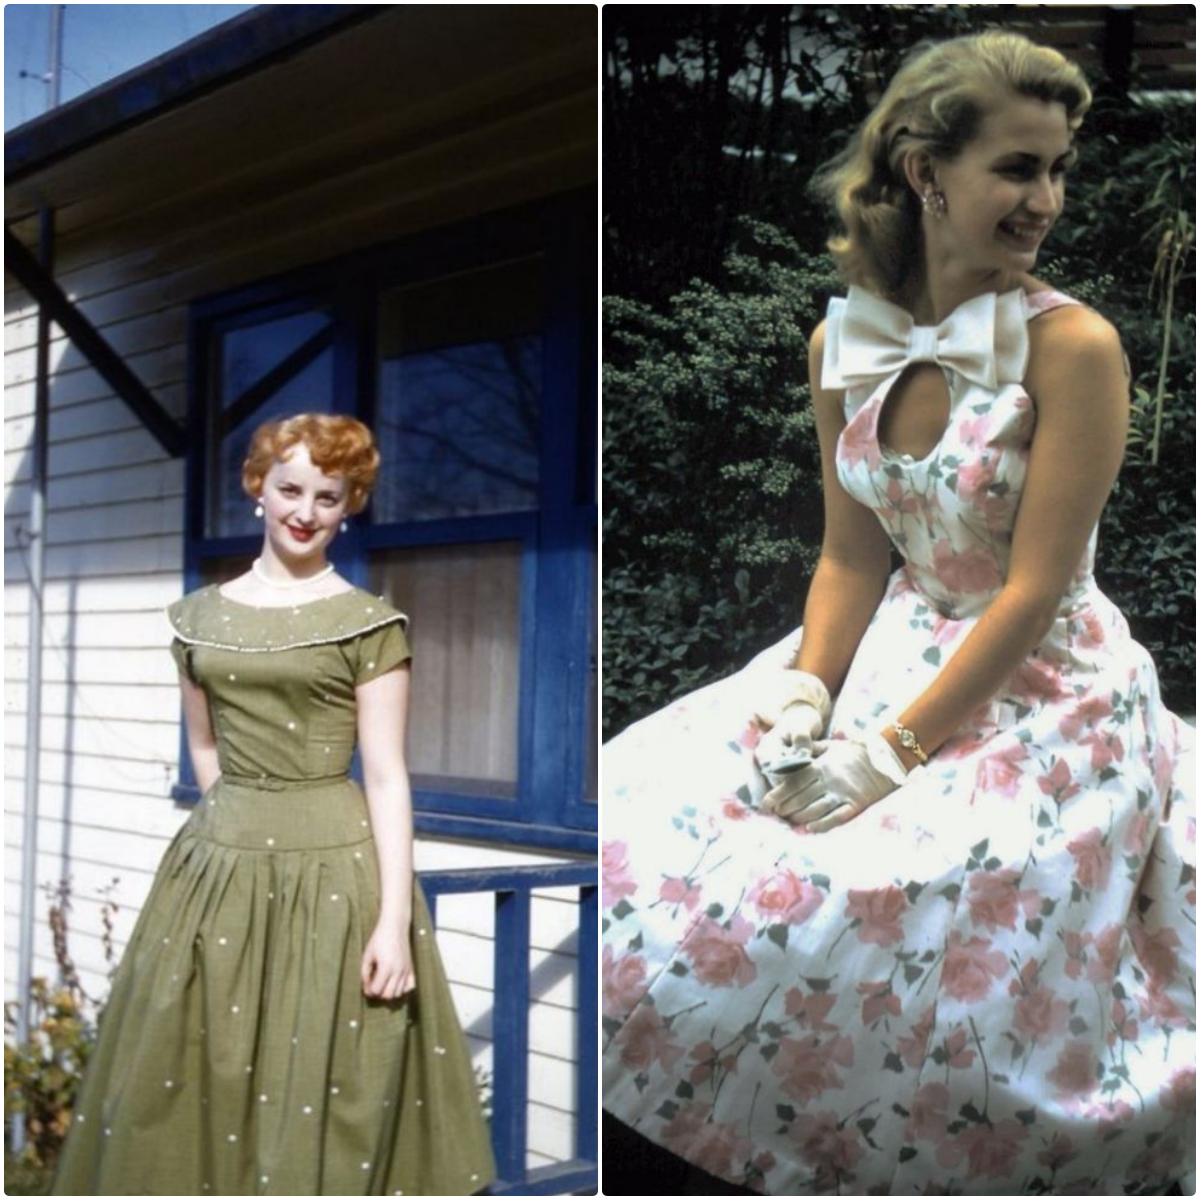 Fabulous Photos of Women in Cocktail Dresses From the 1950s